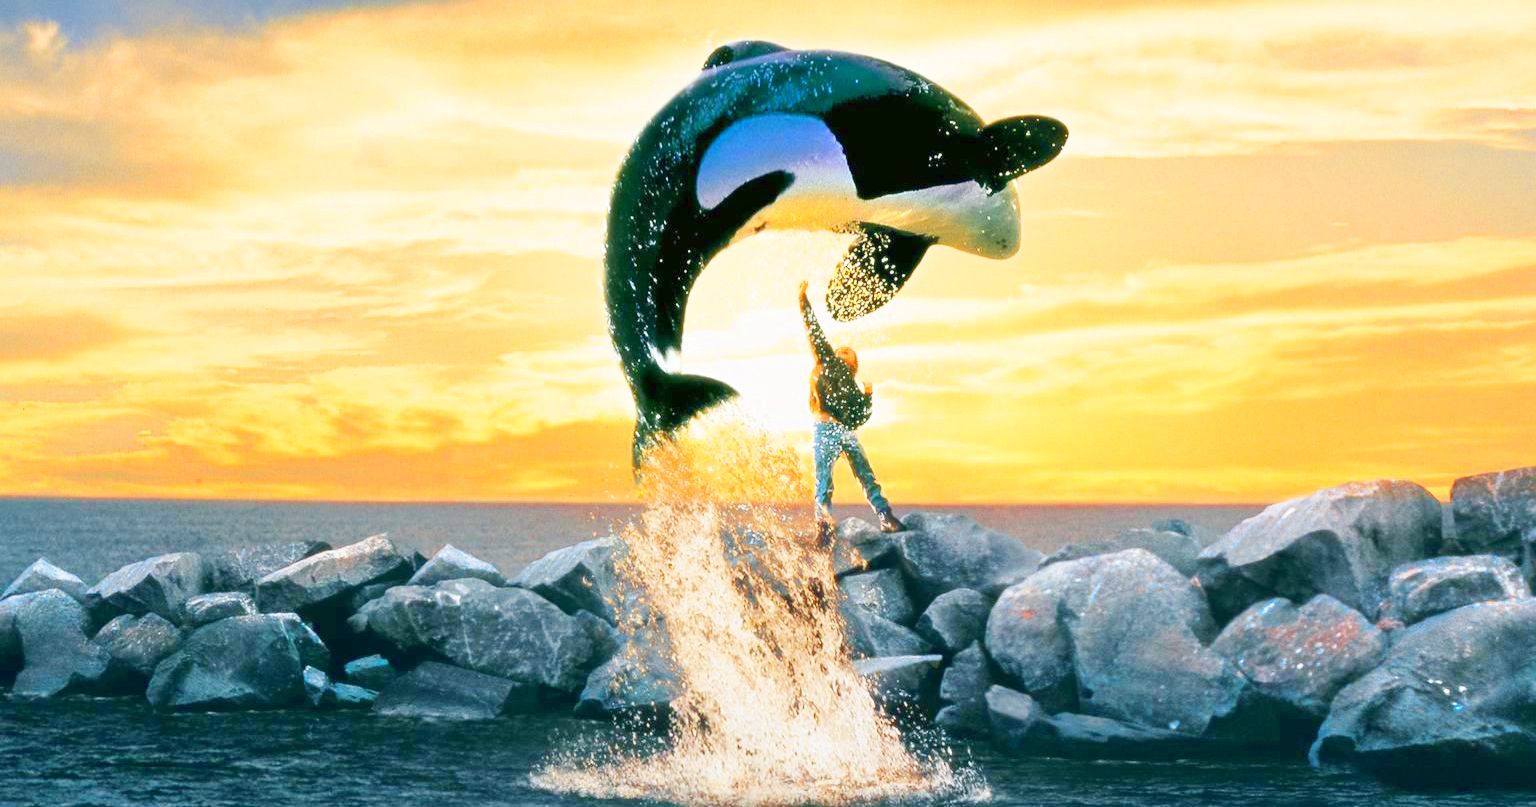 Richard Donner Honored by PETA for Producing Free Willy